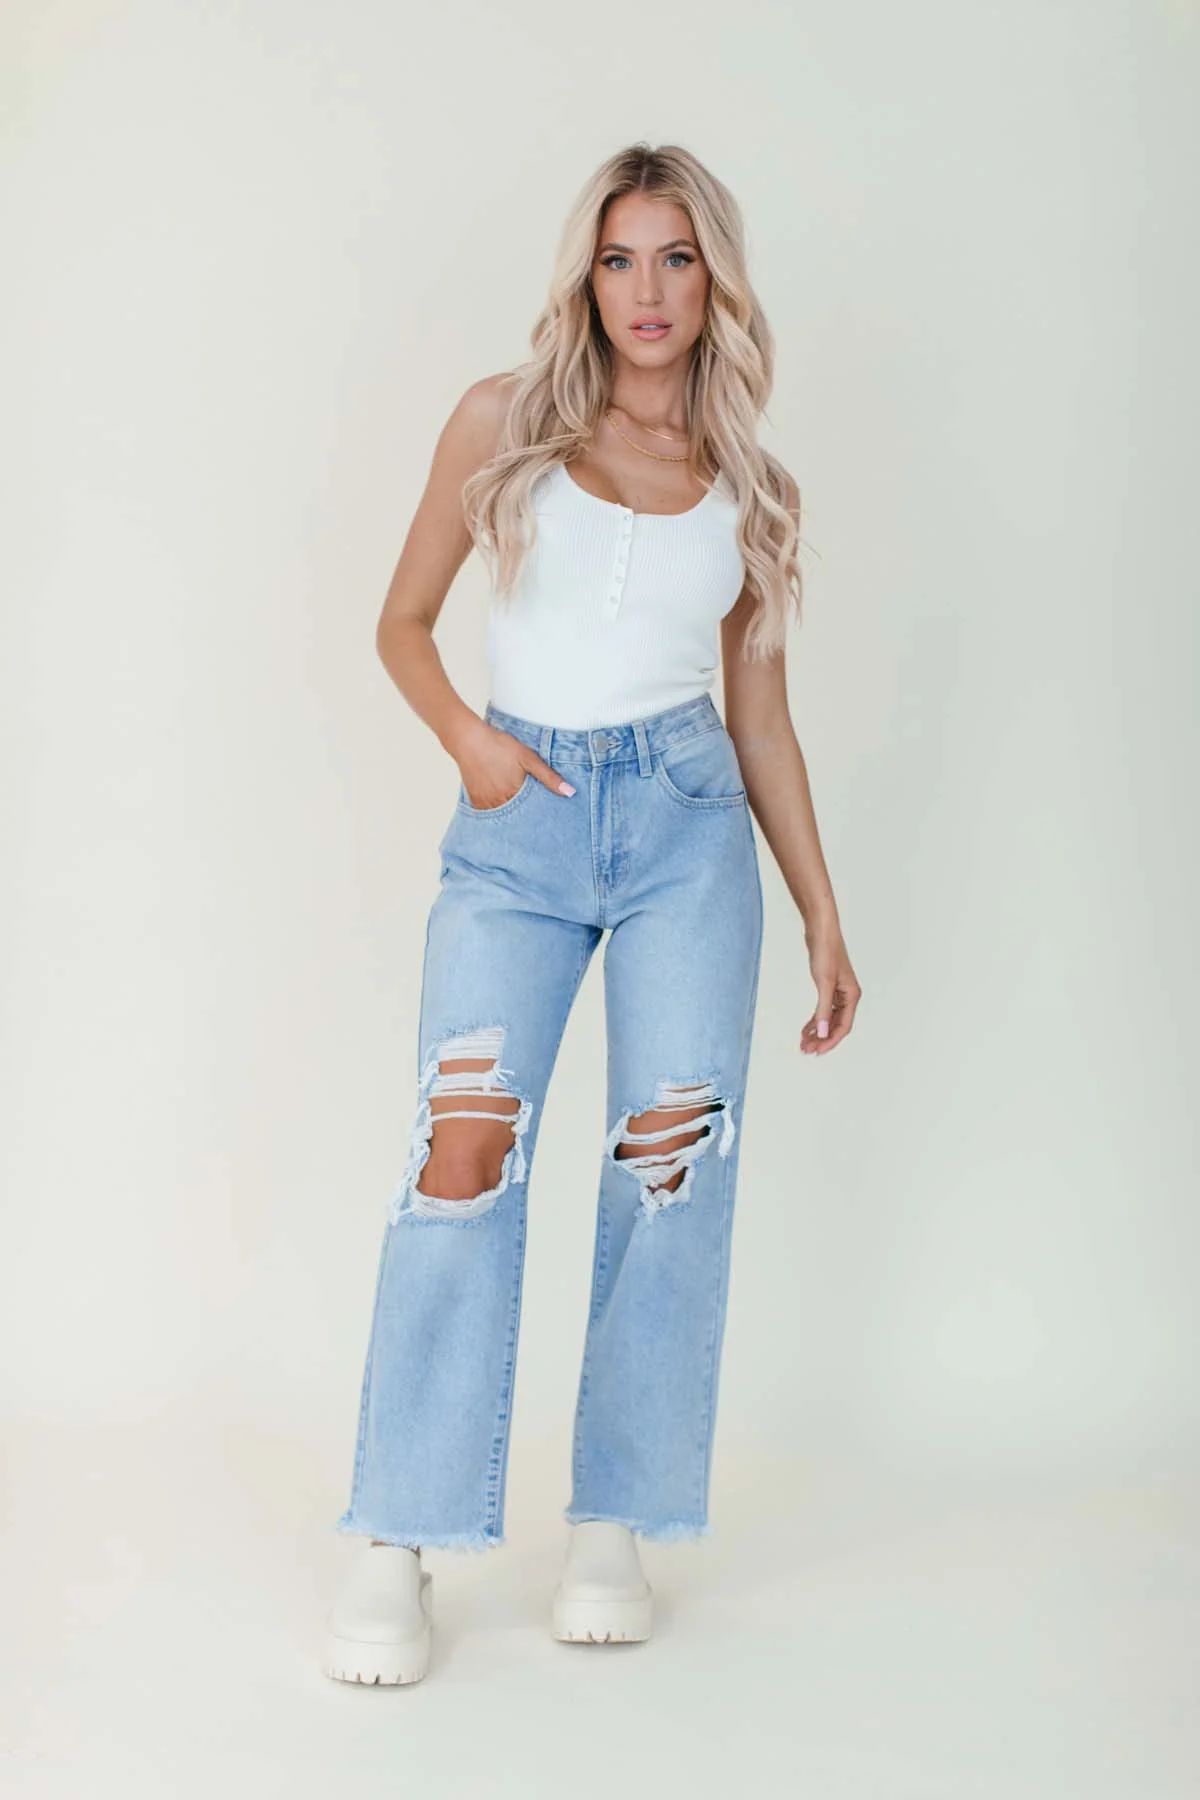 RESTOCK -  Distressed High Waist Mom Jeans | The Post